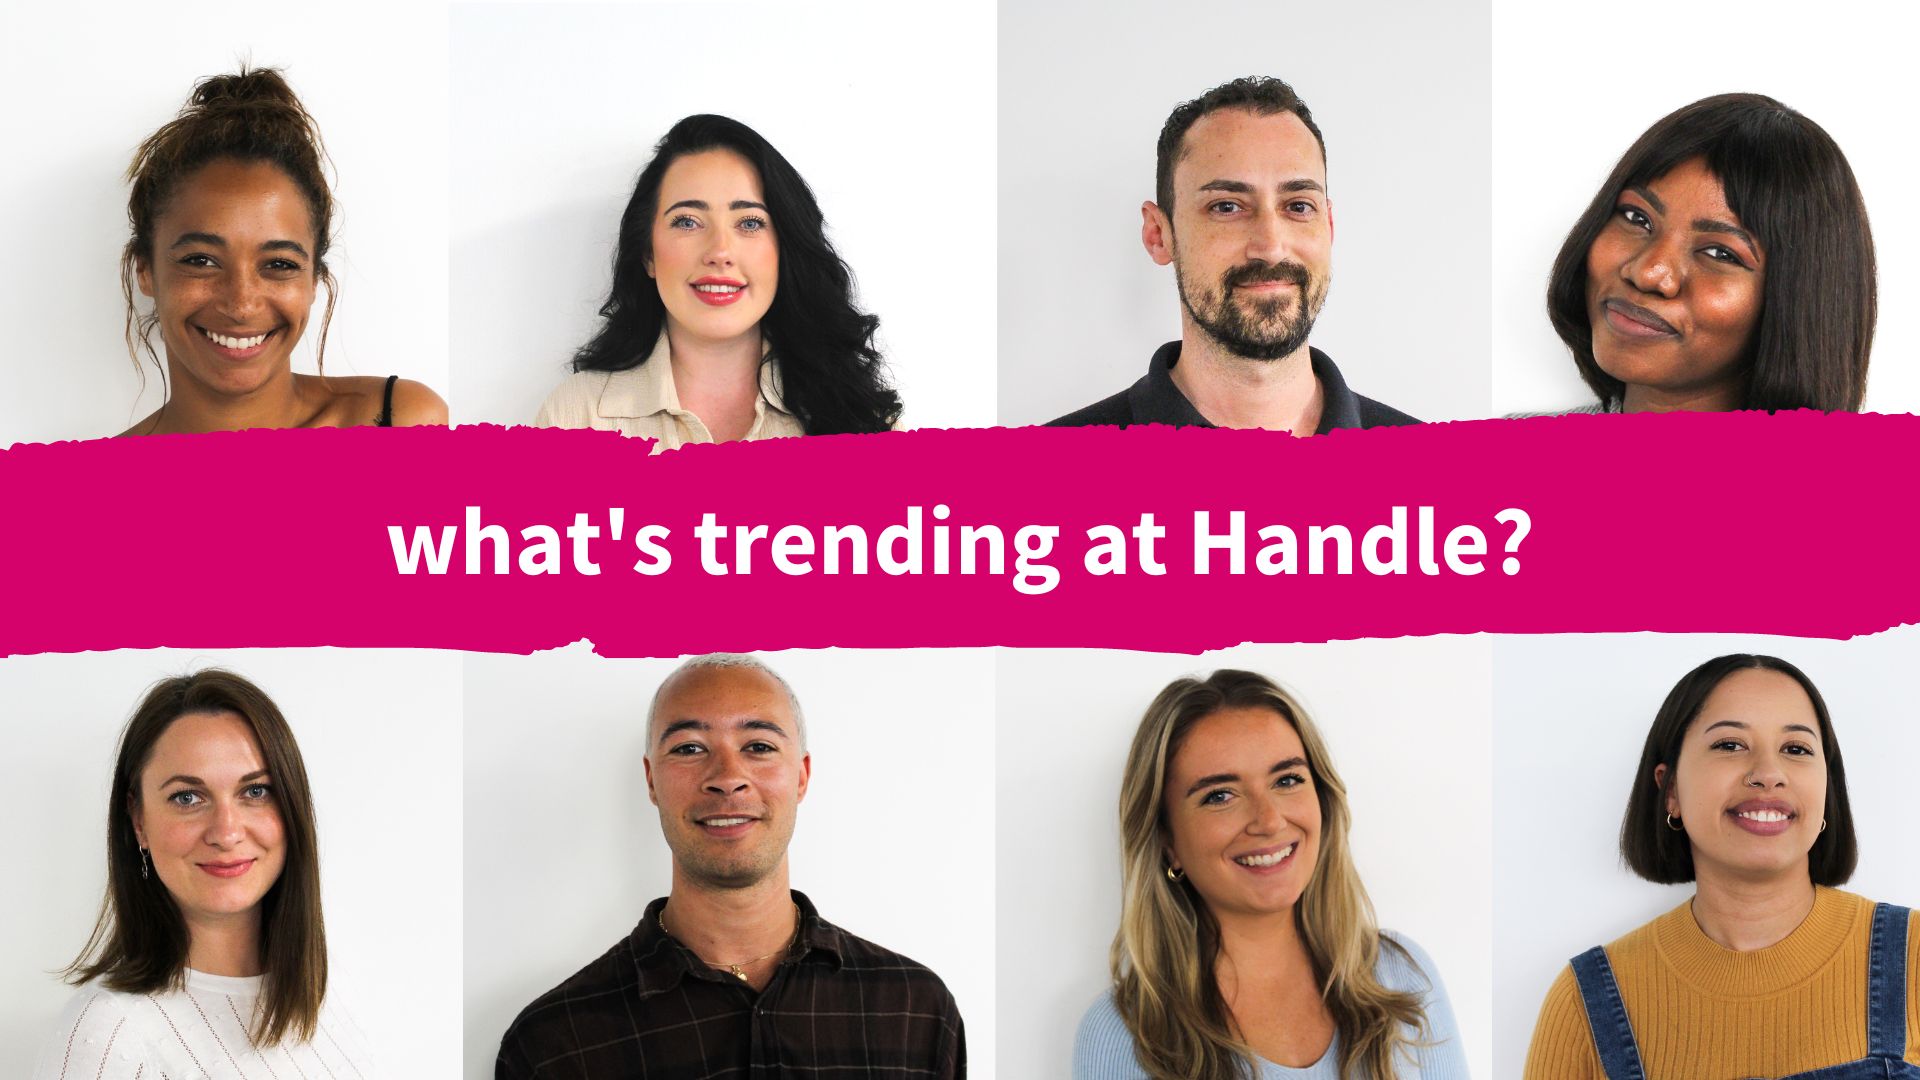 What's trending at Handle?